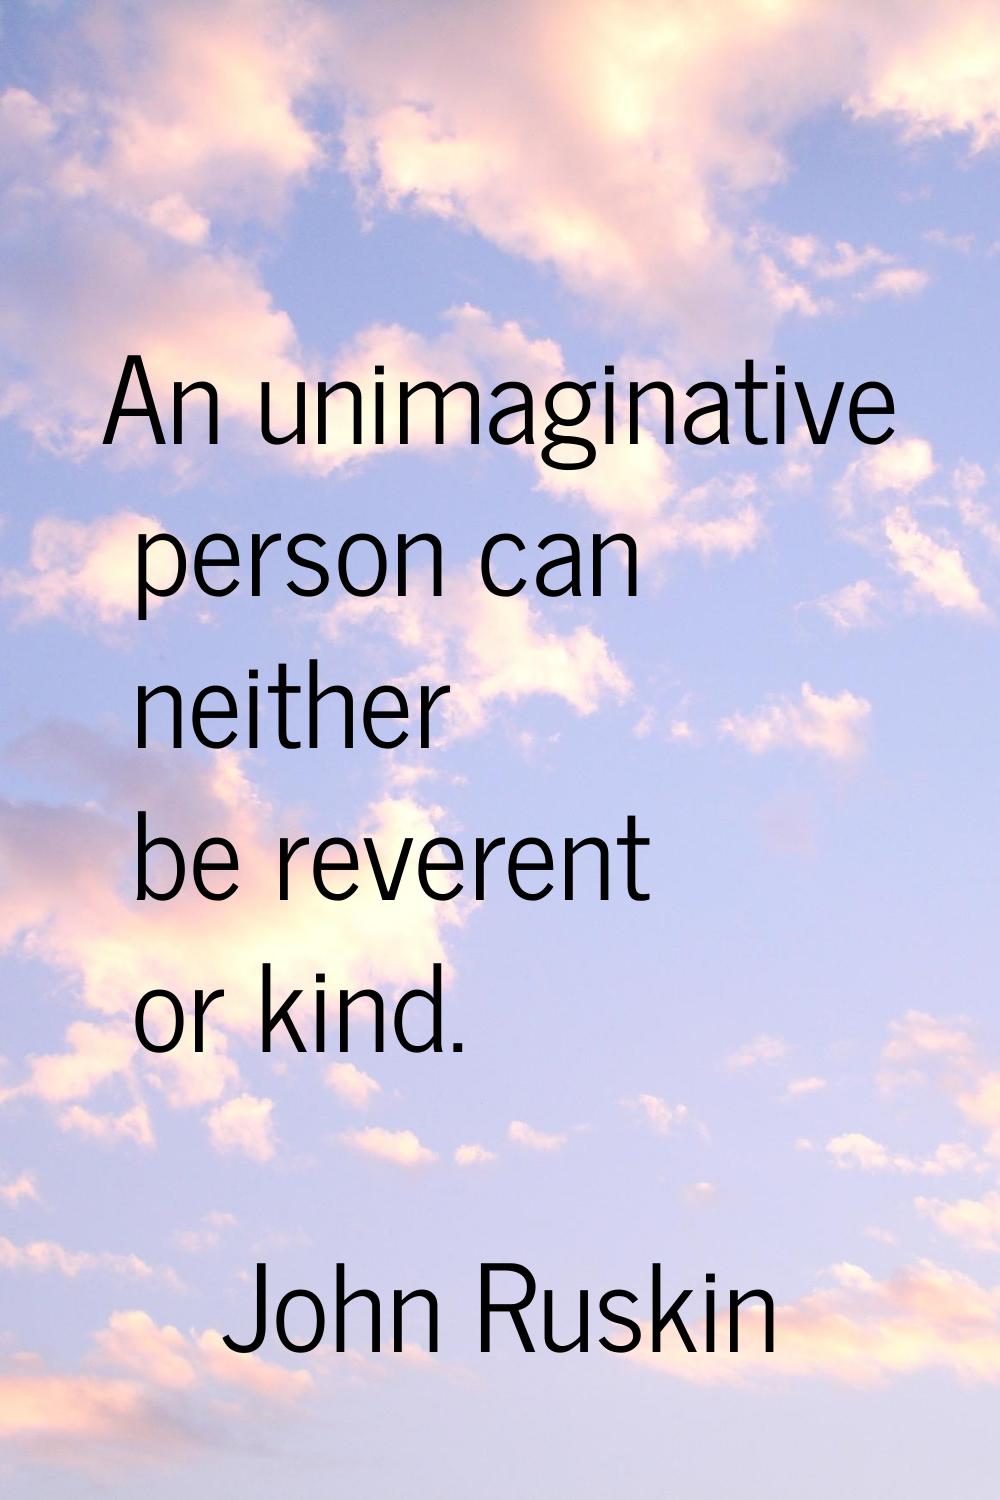 An unimaginative person can neither be reverent or kind.